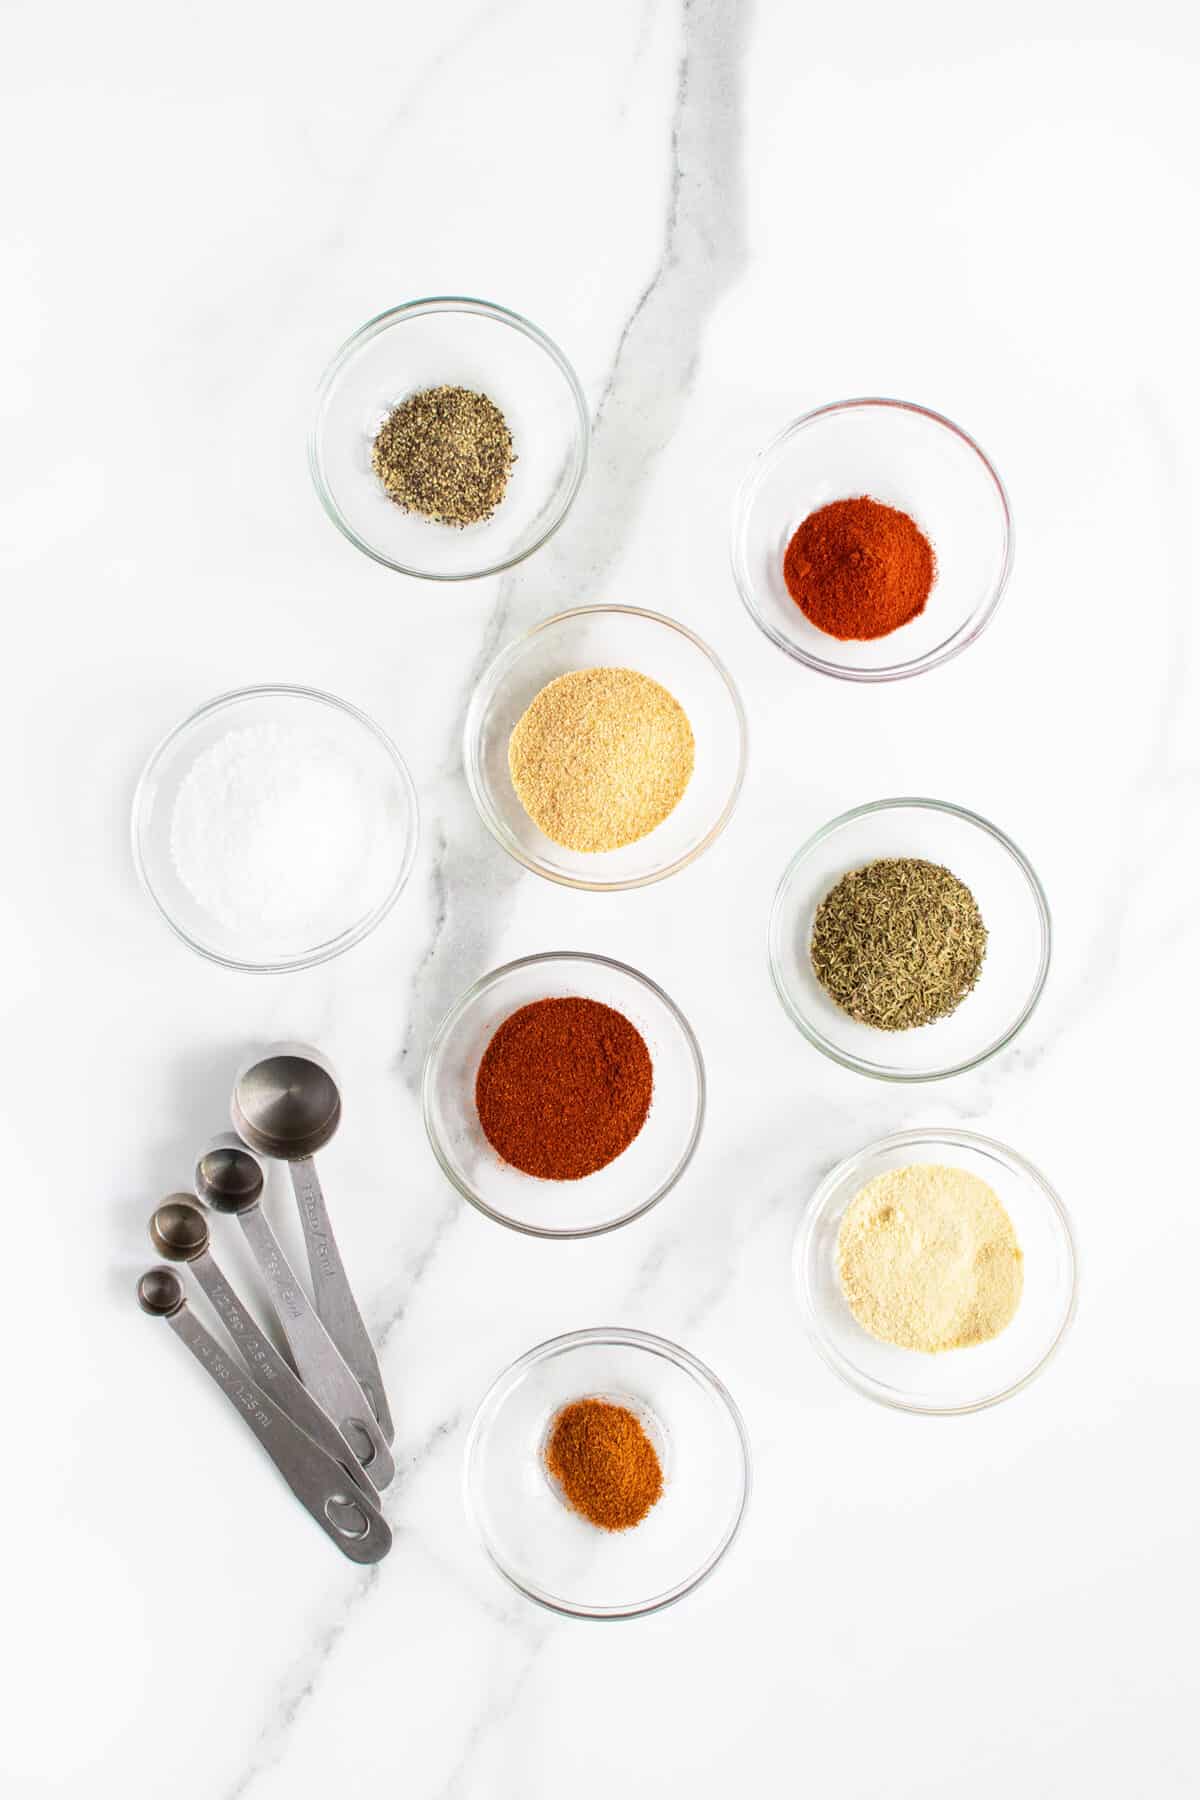 Chicken wing rub ingredients in clear small bowls